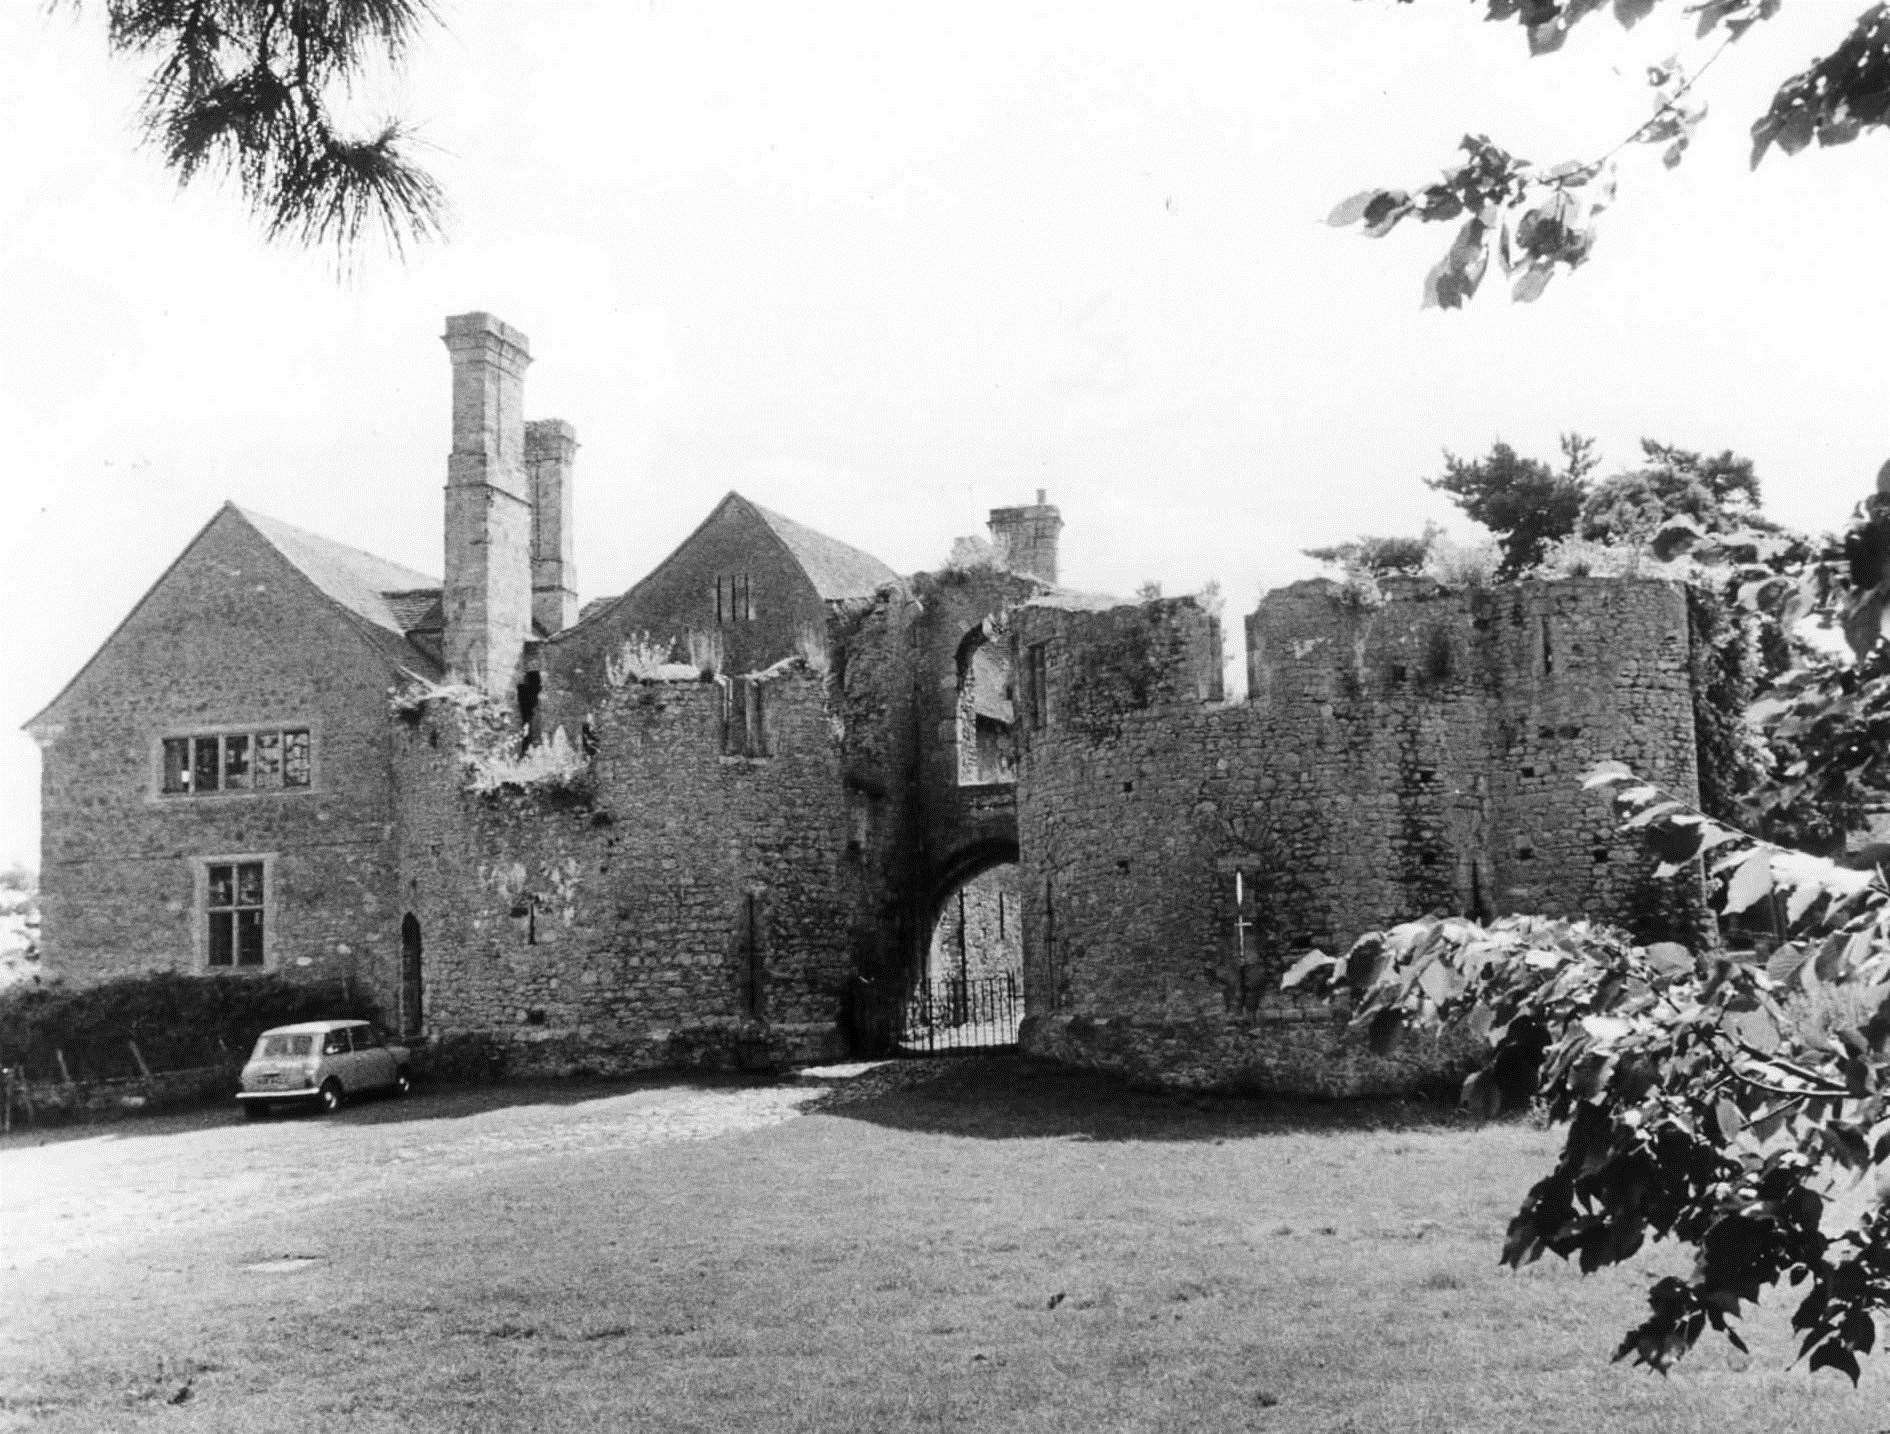 Leybourne Castle pictured in August, 1984